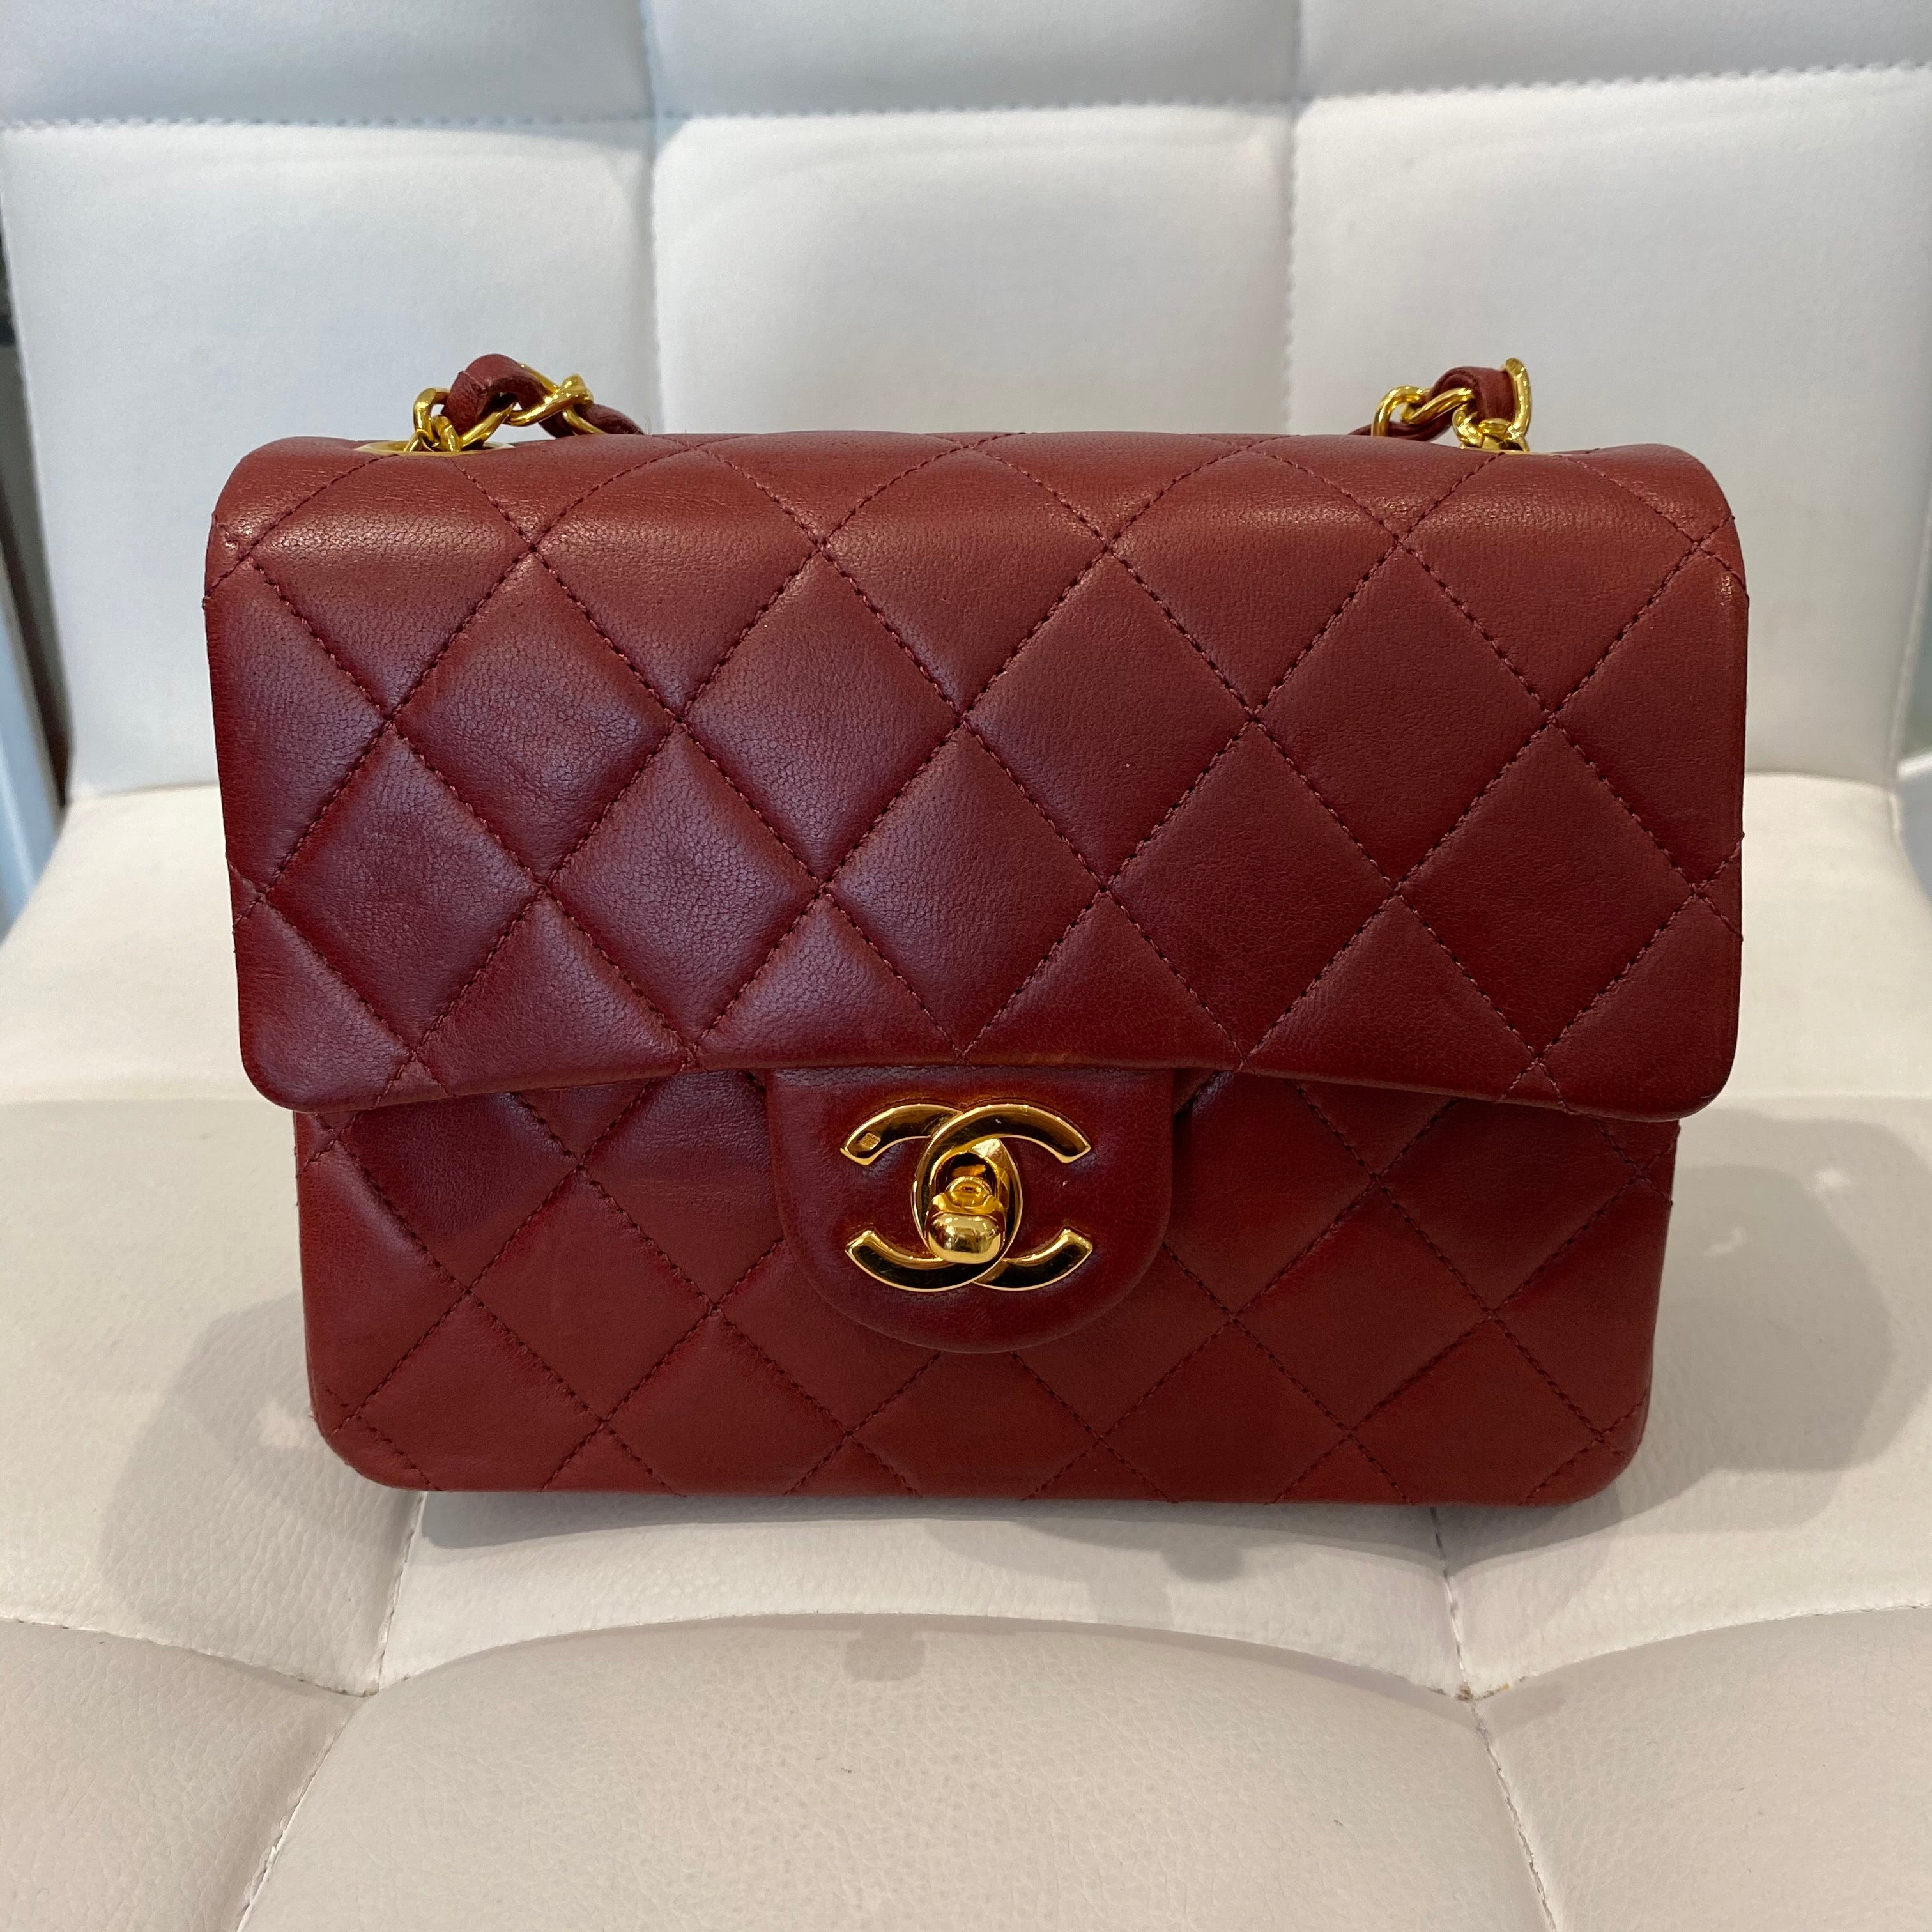 Snag the Latest CHANEL Shoulder Bag Box Bags & Handbags for Women with Fast  and Free Shipping. Authenticity Guaranteed on Designer Handbags $500+ at  .